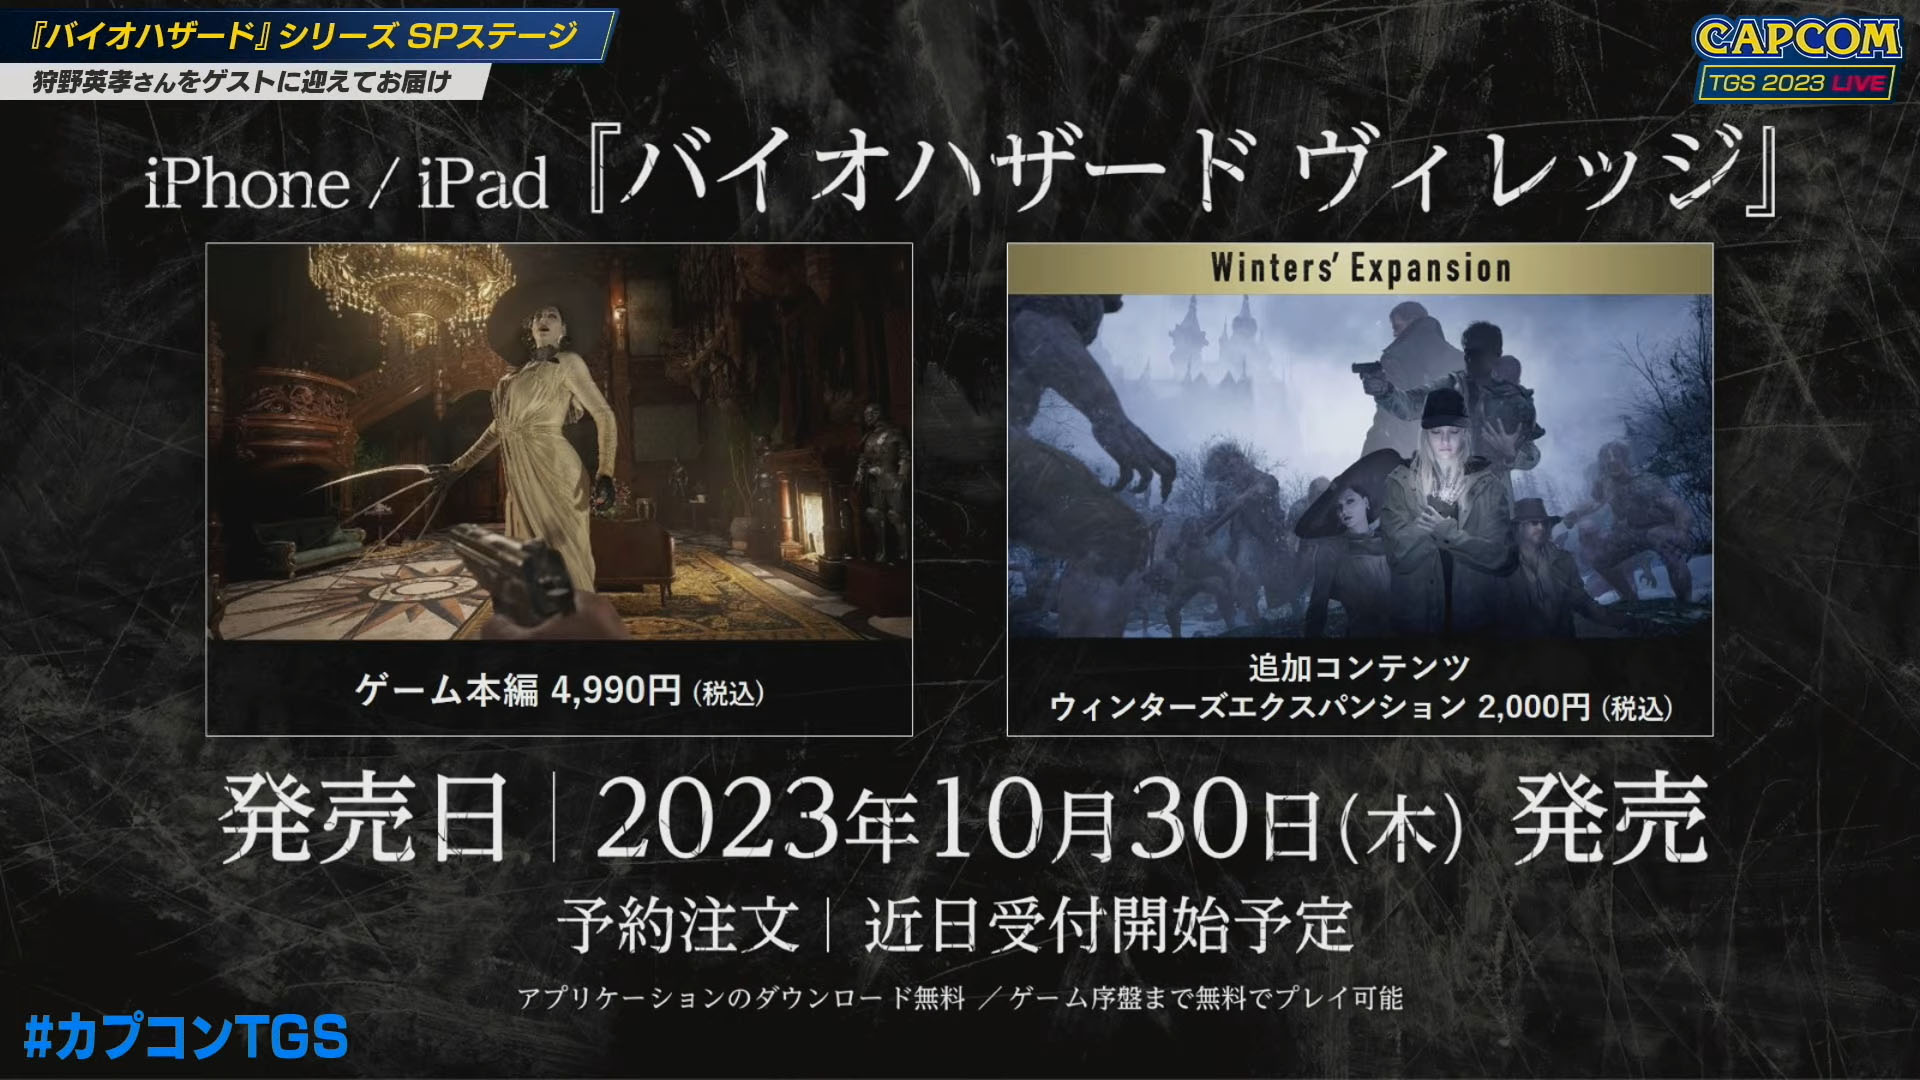 Resident Evil Village for iPhone, iPad launches October 30 - Gematsu